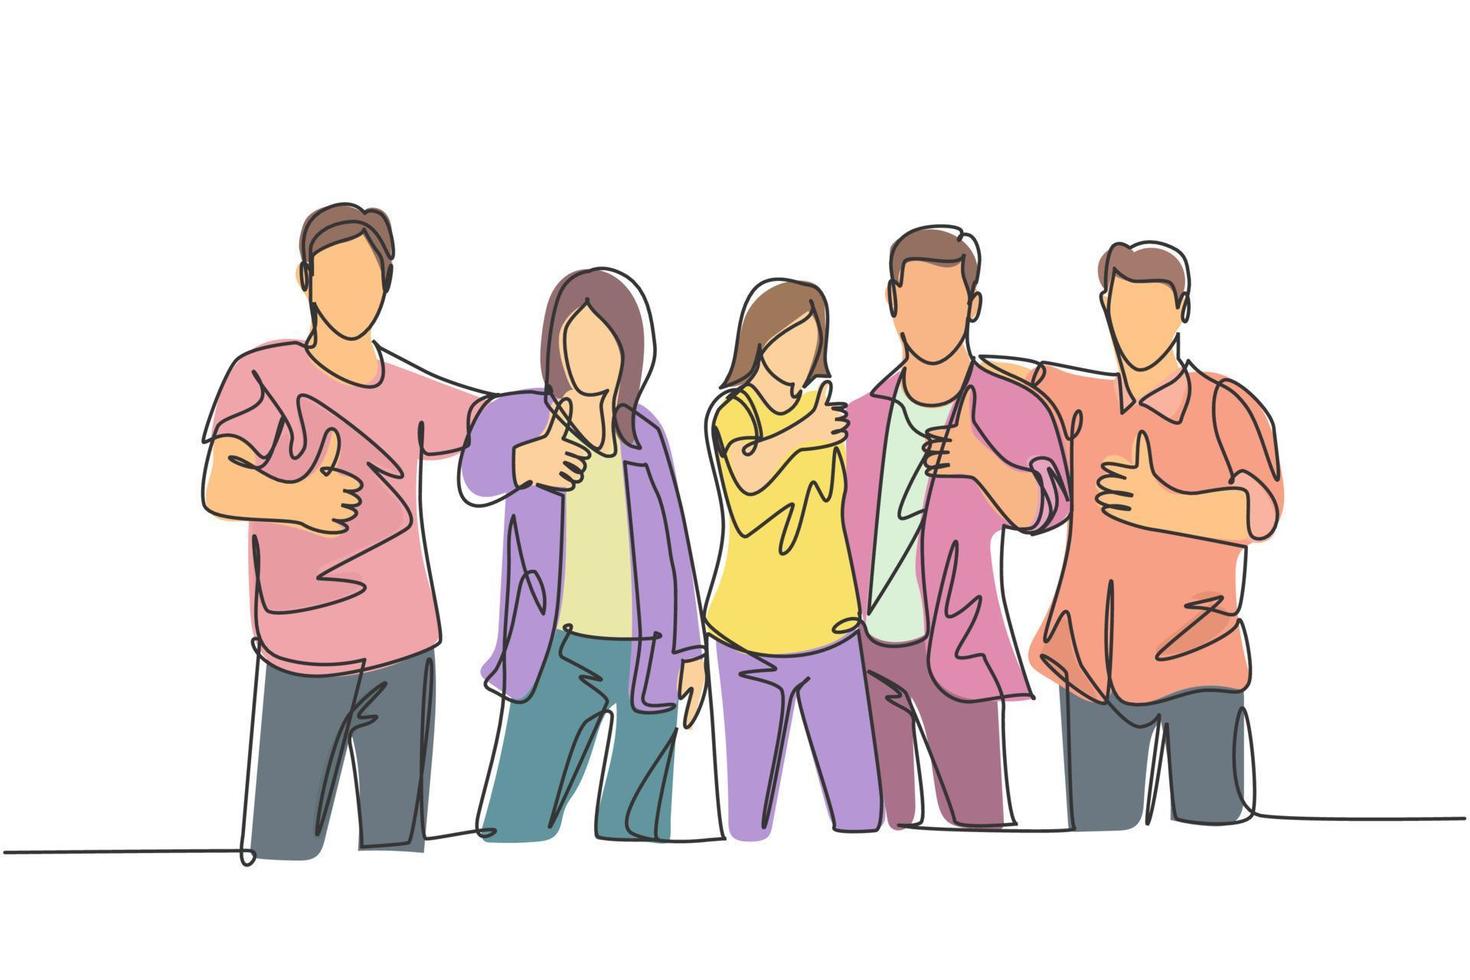 One line drawing of groups of young happy college students giving thumbs up gesture after studying together at campus library. Learn and study in university life concept. Continuous line draw design vector